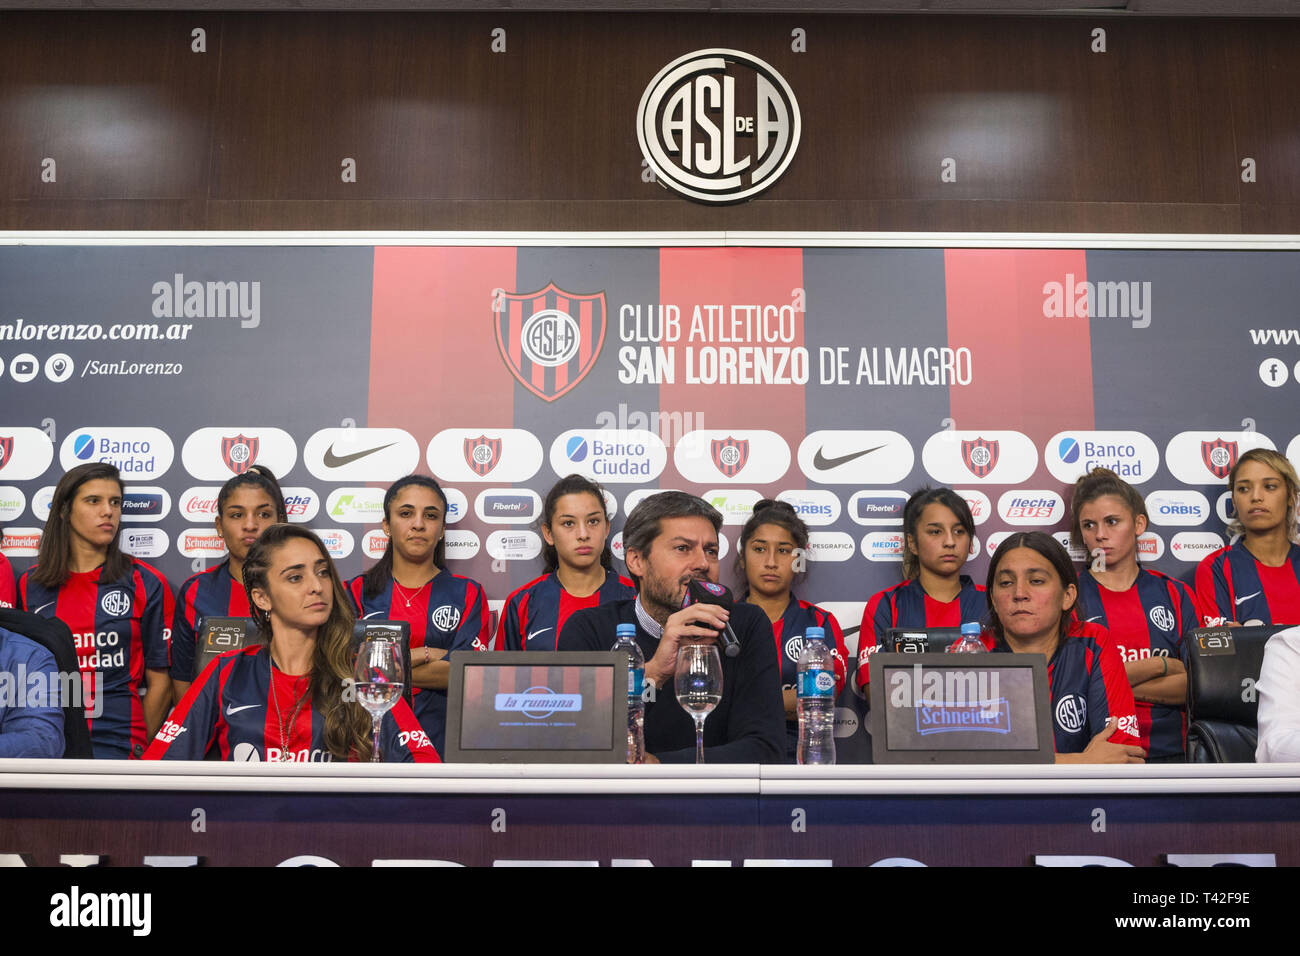 April 12, 2019 - City Of Buenos Aires, City of Buenos Aires, Argentina - SPORTS WorldNews. 2019 April 12, City of Buenos Aires, Argentina. Athletic Club San Lorenzo de Almagro Female football team sign on 2019 April 12th the first professional female football contract in Argentina on first category, after the Argentinian Football Association (AFA in Spanish) agreed on 2019 March 18 to professionalized female football.MACARENA SANCHEZ, one of the football players who fight the lasts months for Professional Female Football (left), MATIAS LAMMENS, President of Athletic Club San Lorenzo (Center), Stock Photo